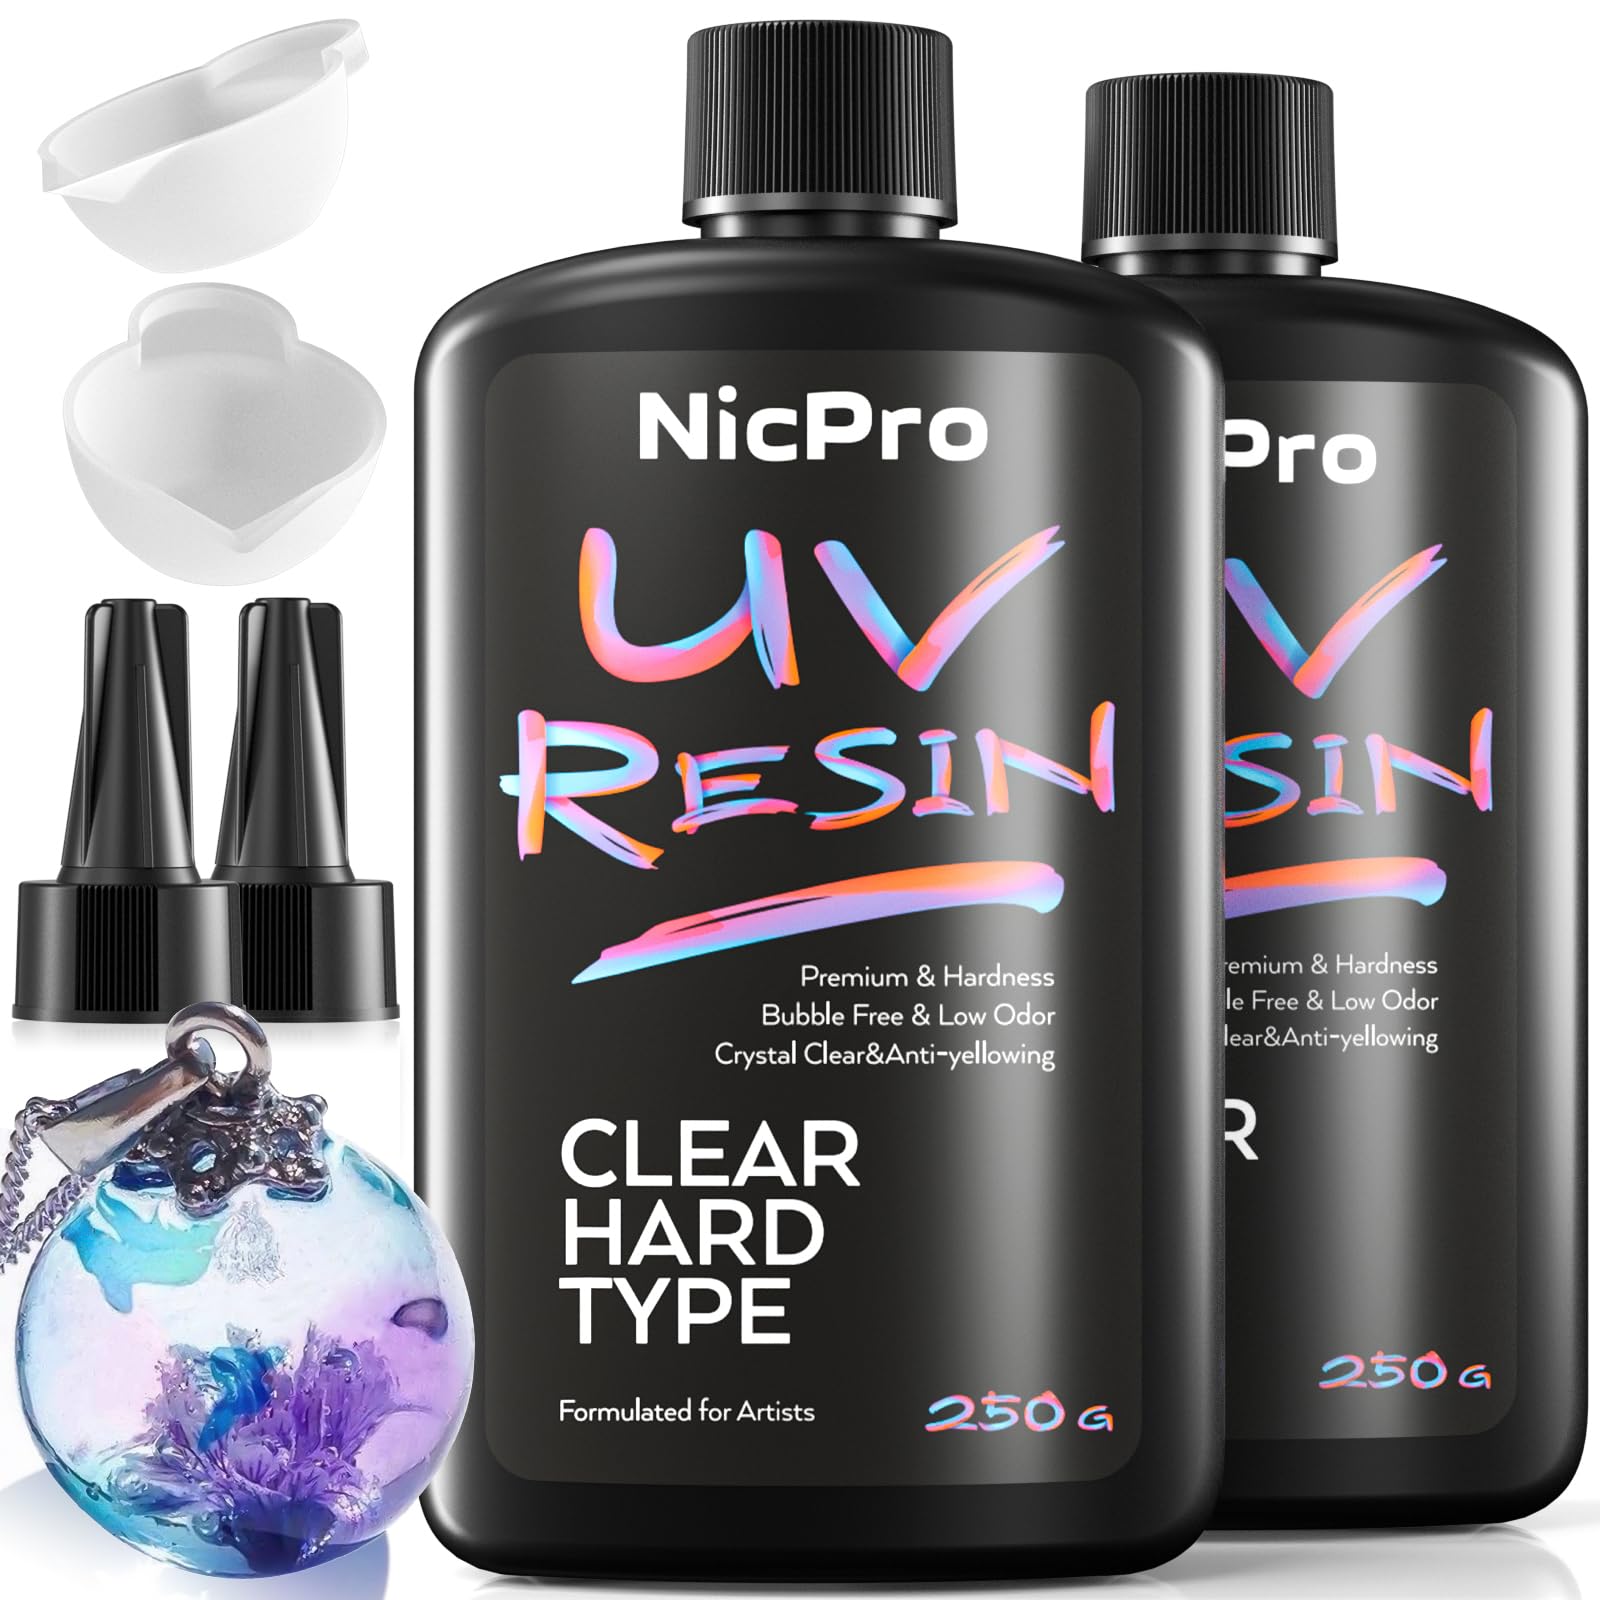 Nicpro UV Resin 500g, 2 PCS Upgrade Crystal Clear Ultraviolet Epoxy Resin Glue Kit, Low Odor & Quick Curing Sunlight Cure Hard UV Resin for Jewelry Making, Handmade DIY Craft, Coating and Casting